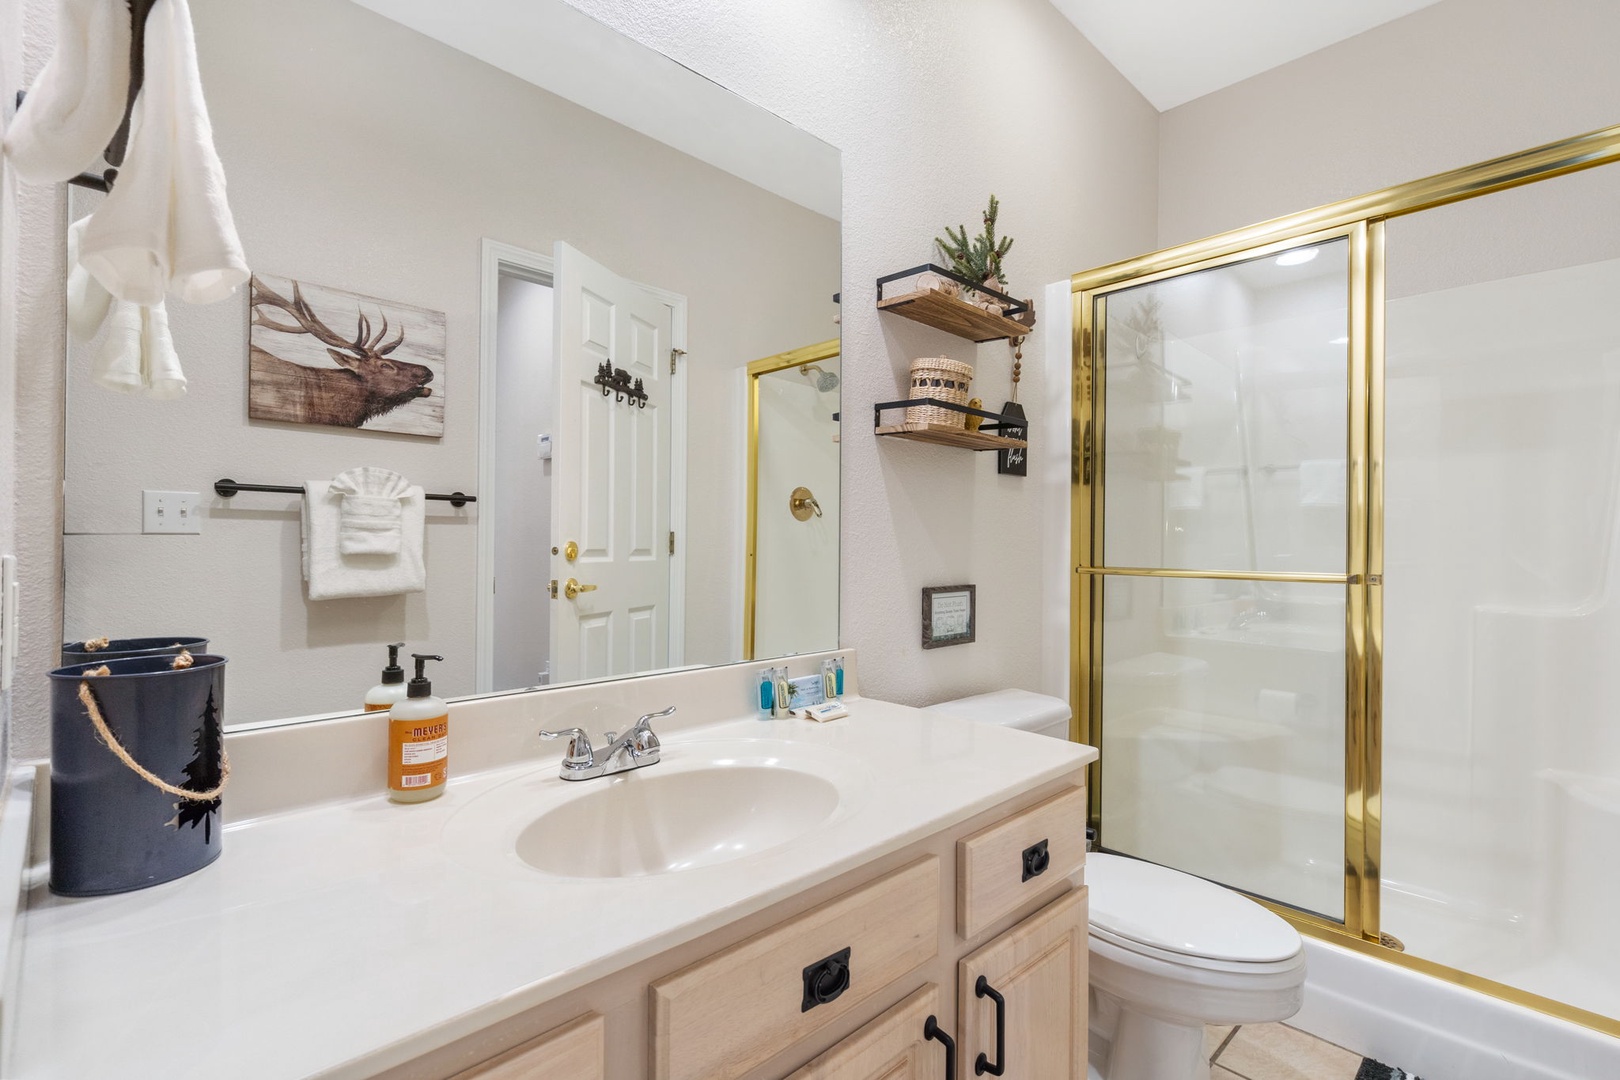 This full bathroom with a shower connects the queen bedroom to the hall